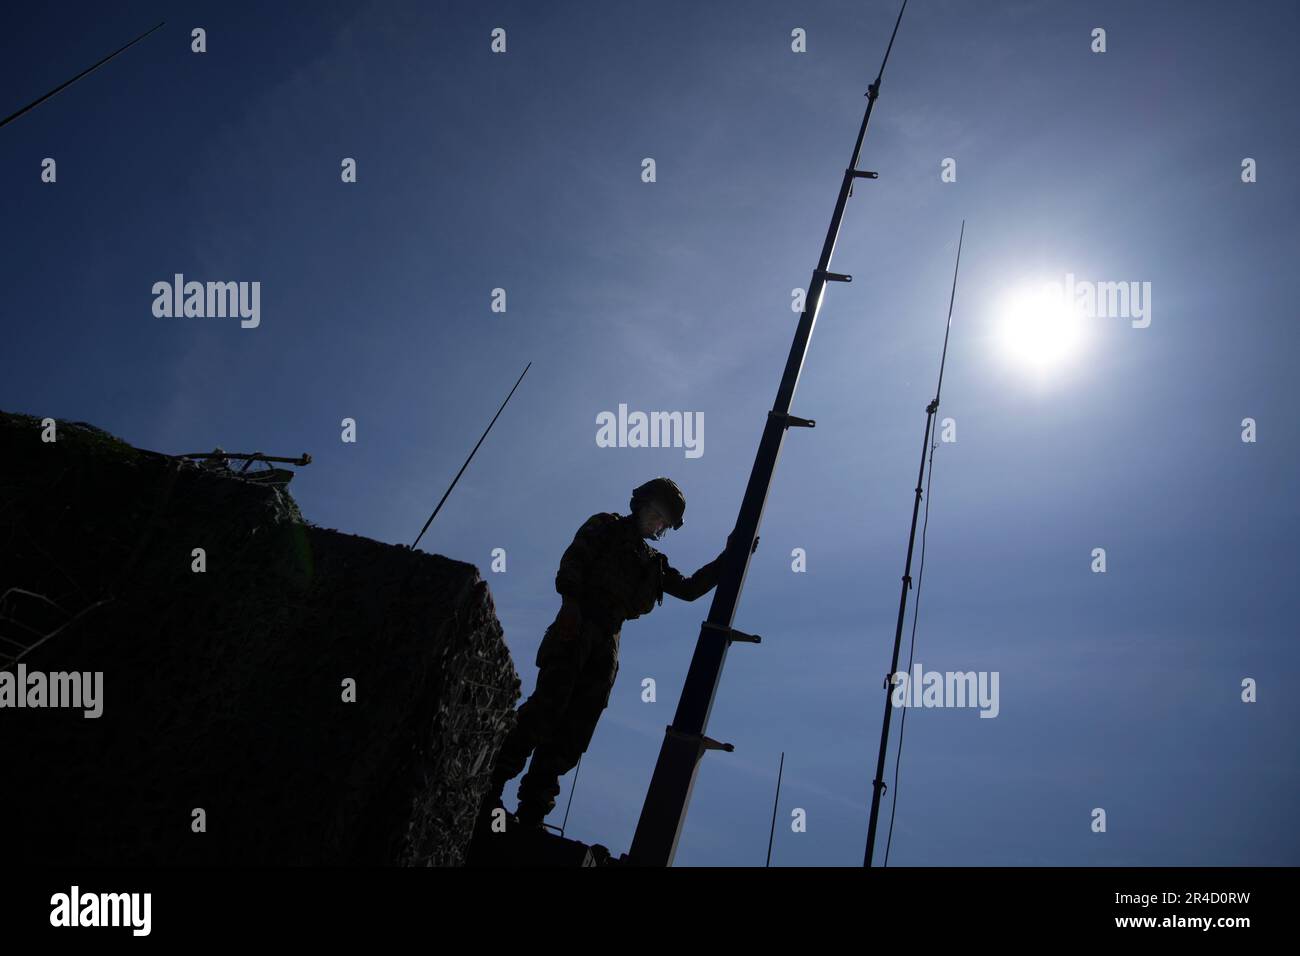 A soldier is seen holding a communications antenna near Tapa, Estonia on 20 May, 2023. Estonia is hosting the Spring Storm NATO exercises involving over 13 thousand personnel with US, German, British, French and Polish forces training together with the Estonian Defence Forces (eDF). (Photo by Jaap Arriens / Sipa USA) Stock Photo